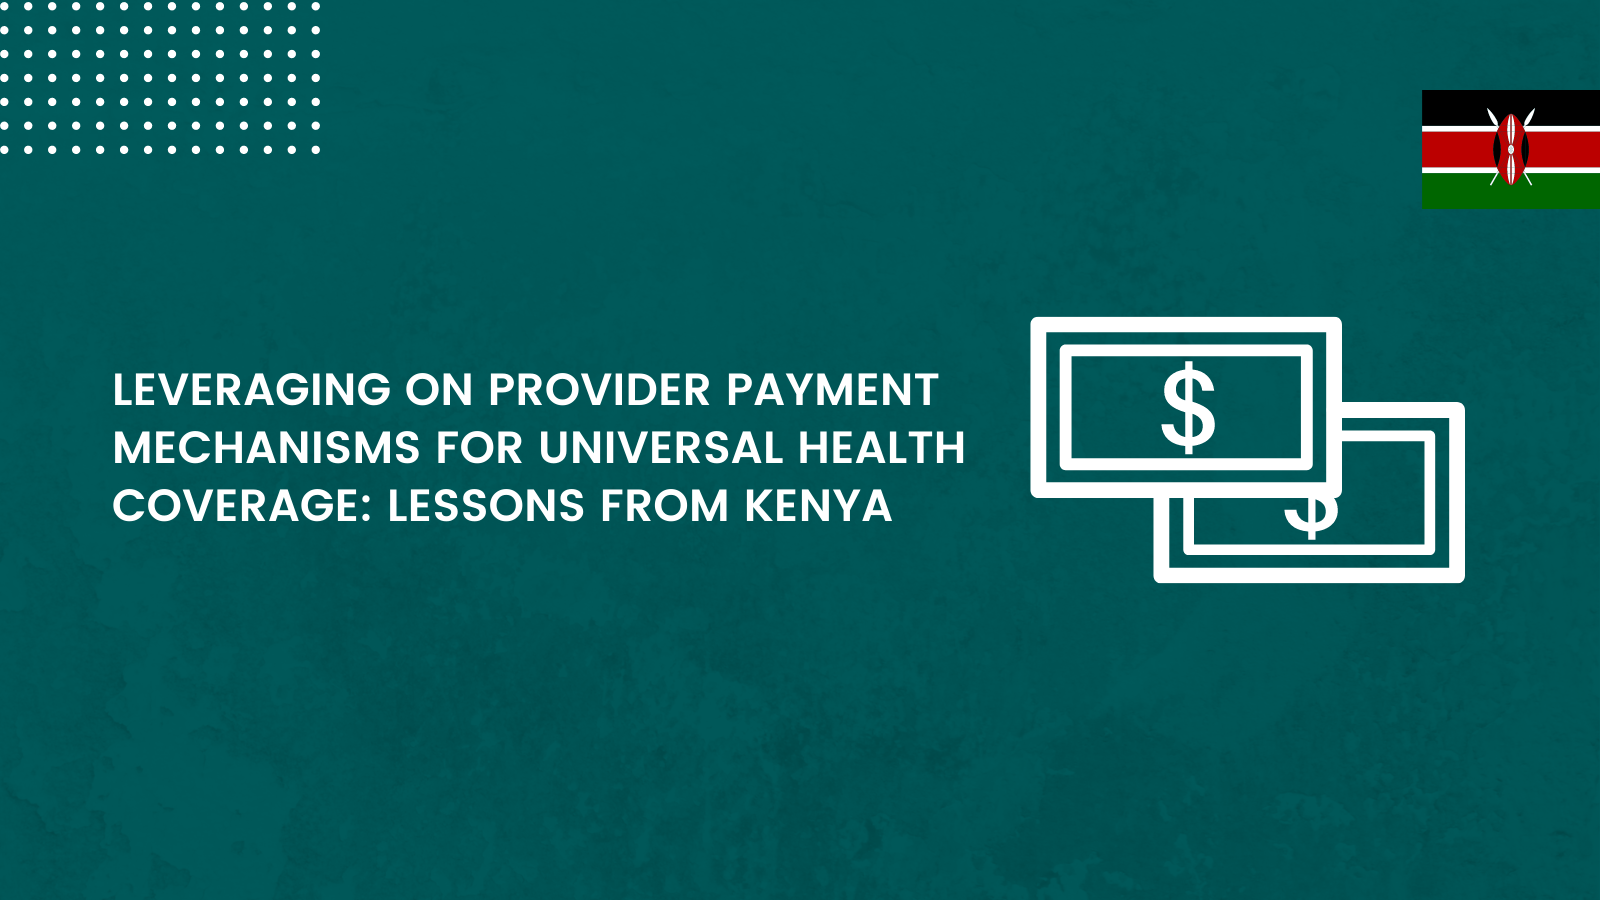 Leveraging on Provider Payment Mechanisms for Universal Health Coverage: Lessons from Kenya